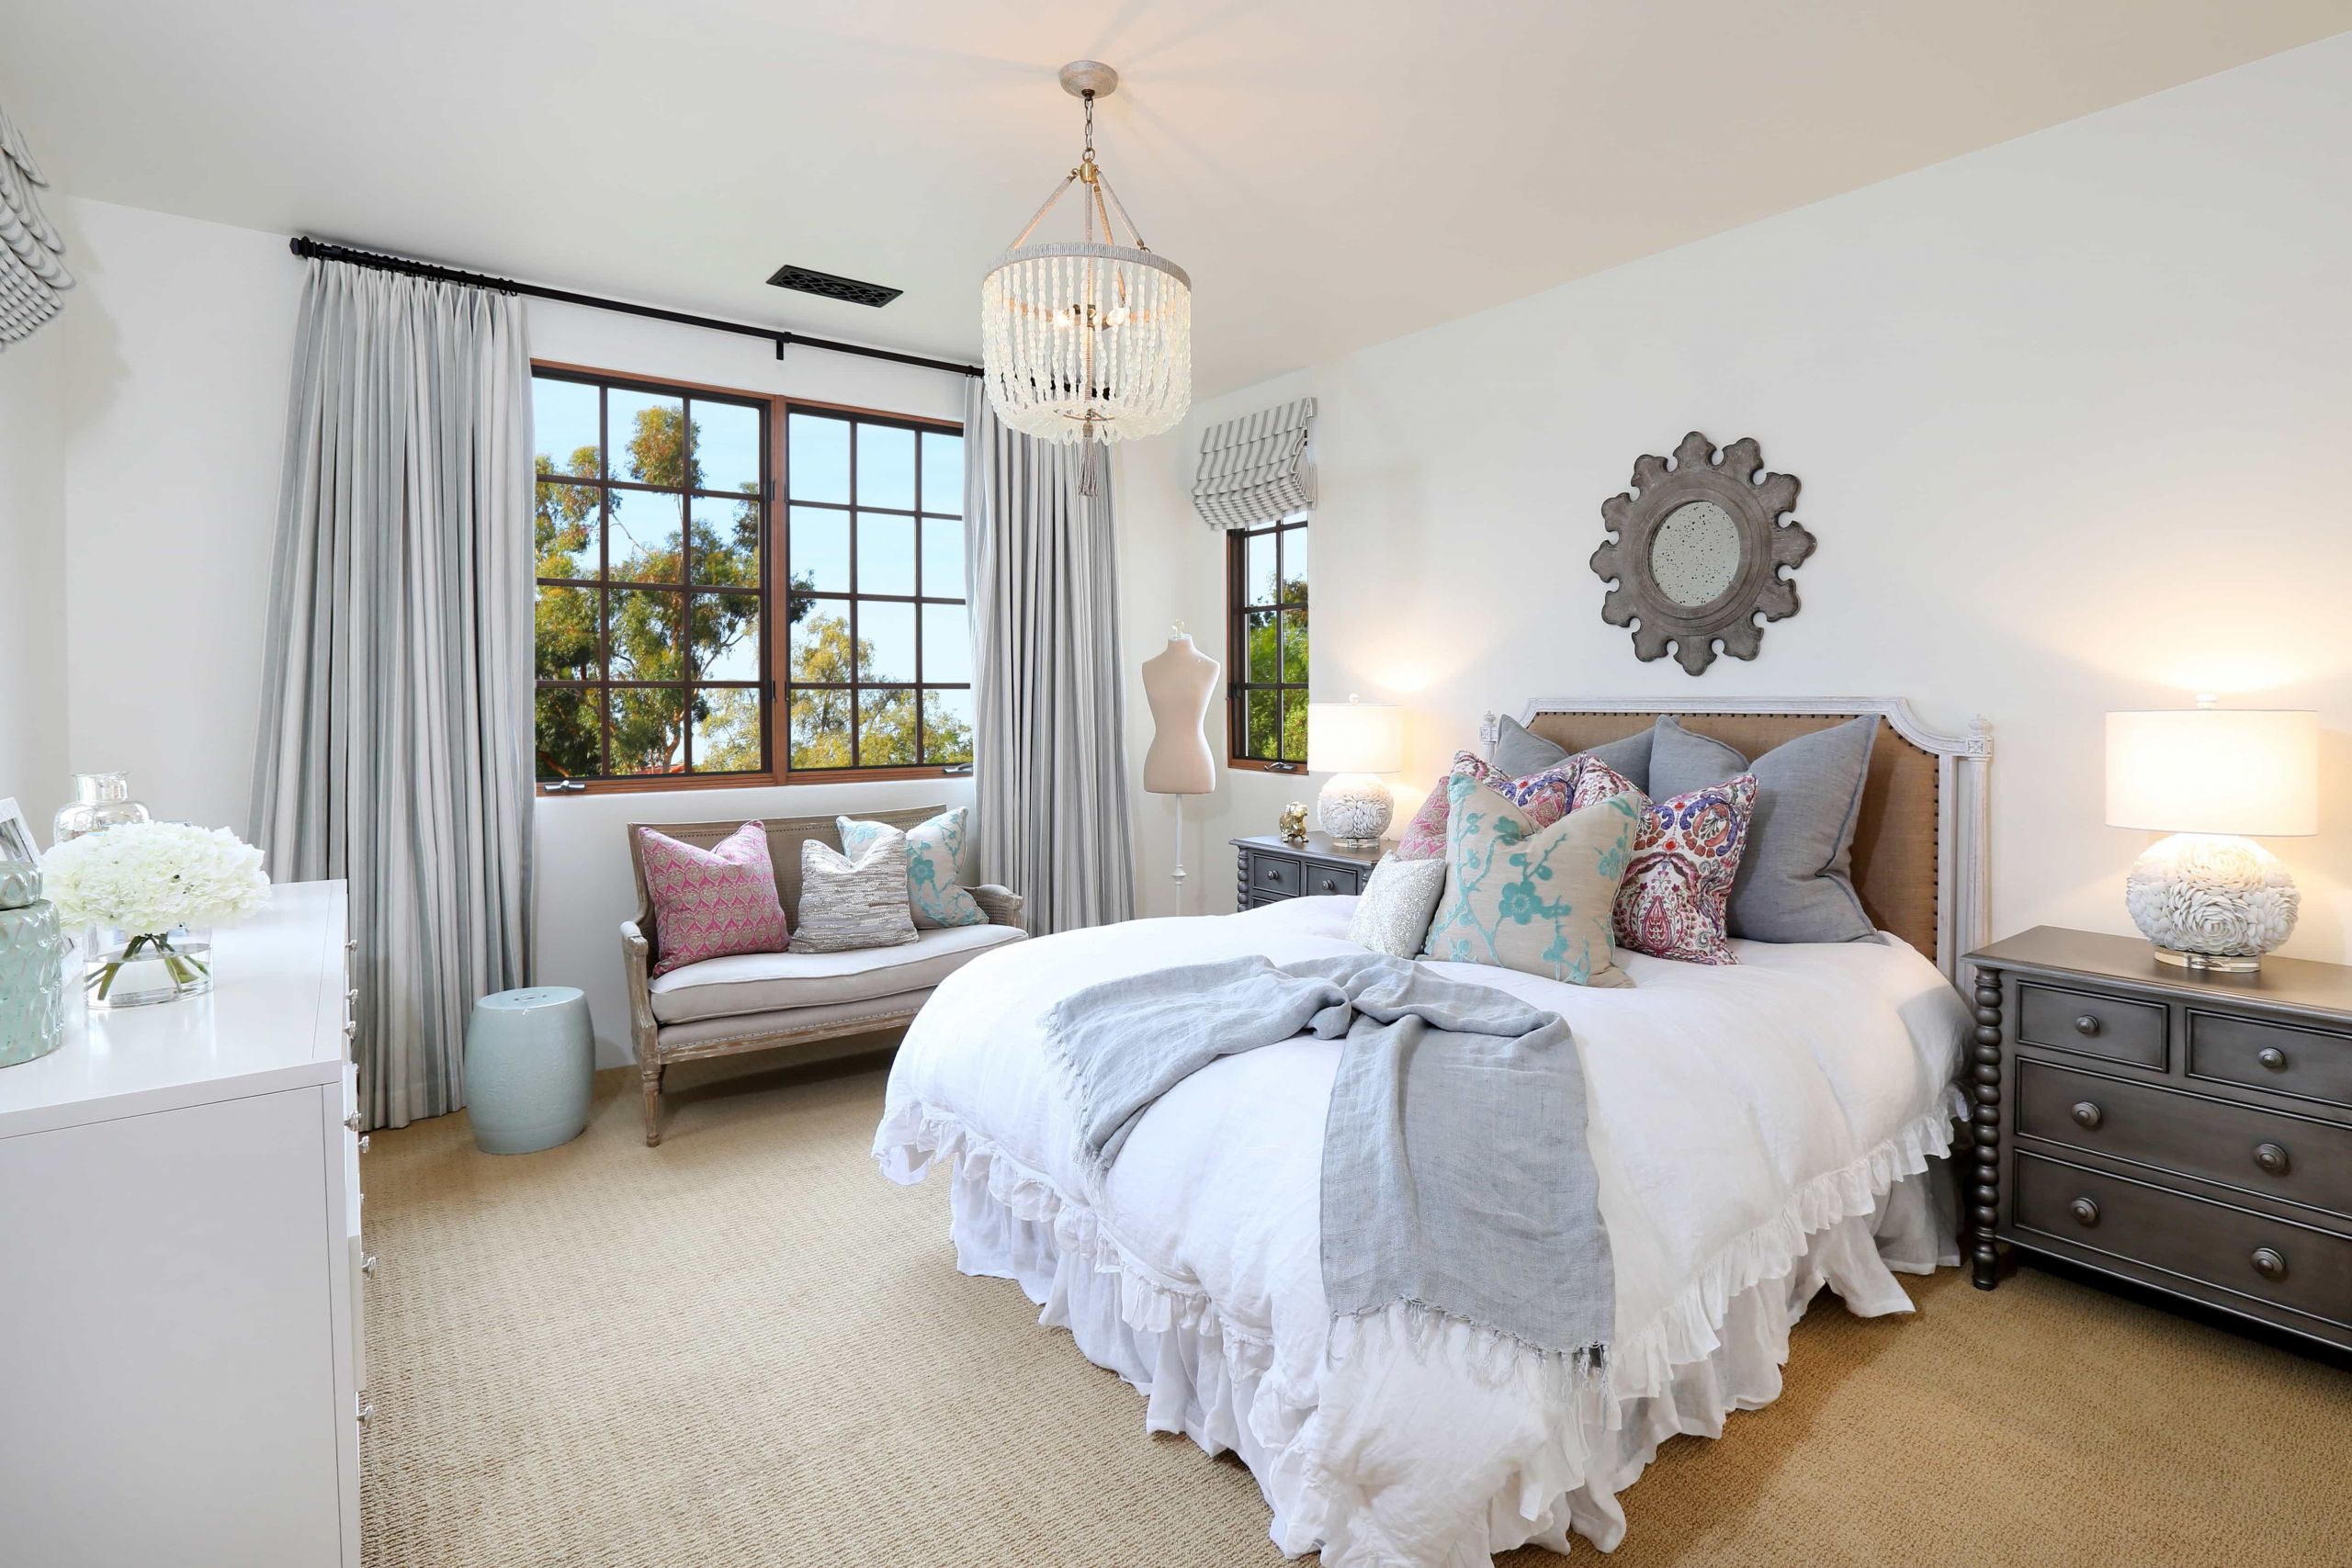 Modern Shabby Chic Bedroom Best Of How to Decorate A Shabby Chic Bedroom